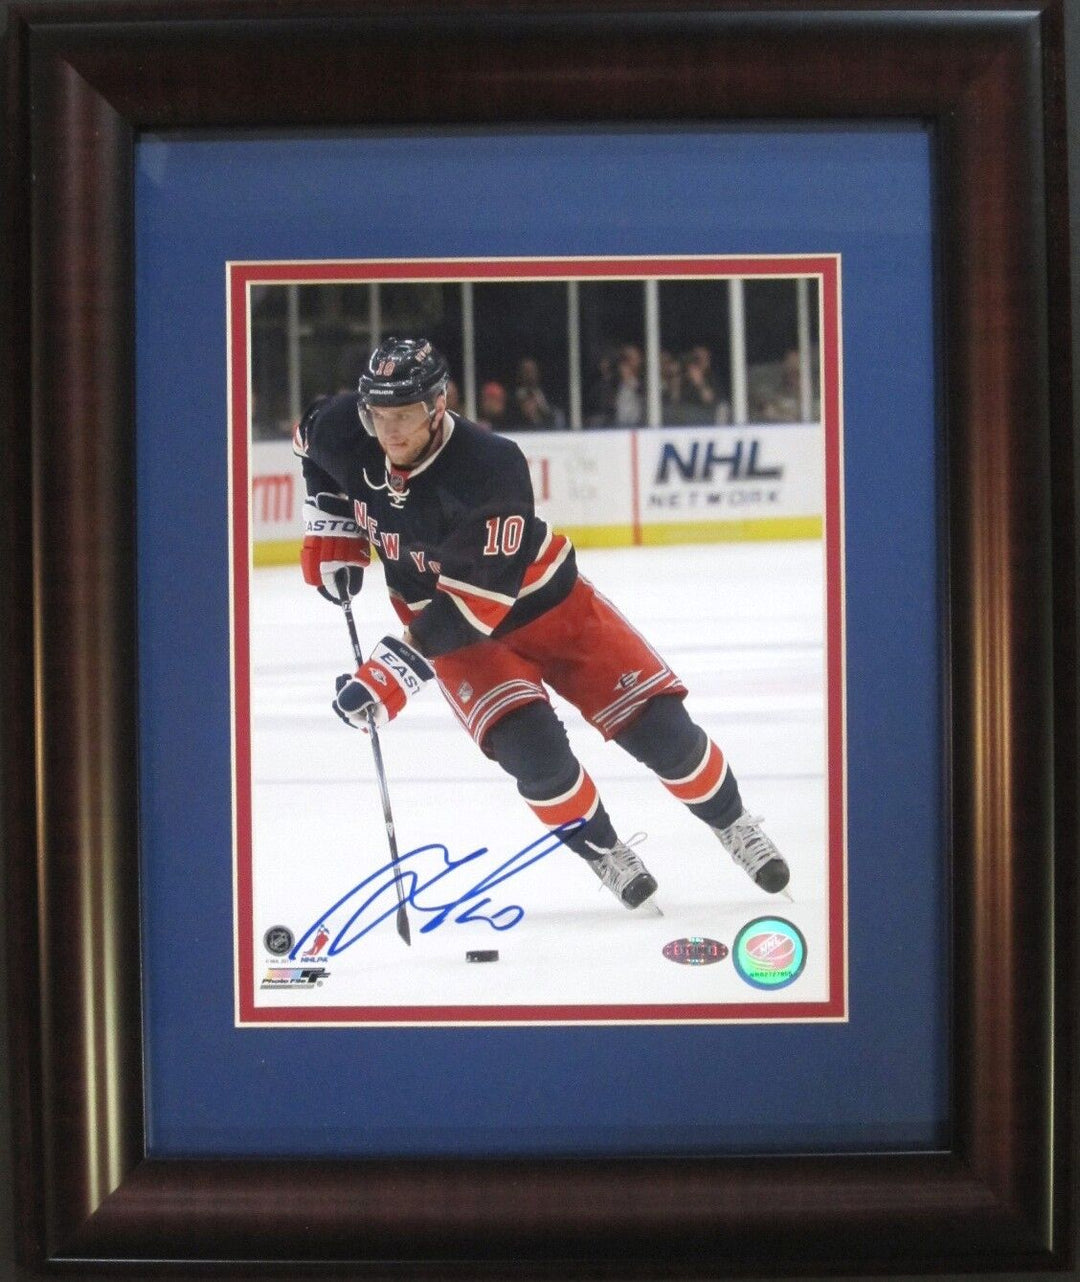 Marian Gaborik NY Rangers Signed Framed 8x10 Photo with Steiner cert Image 1